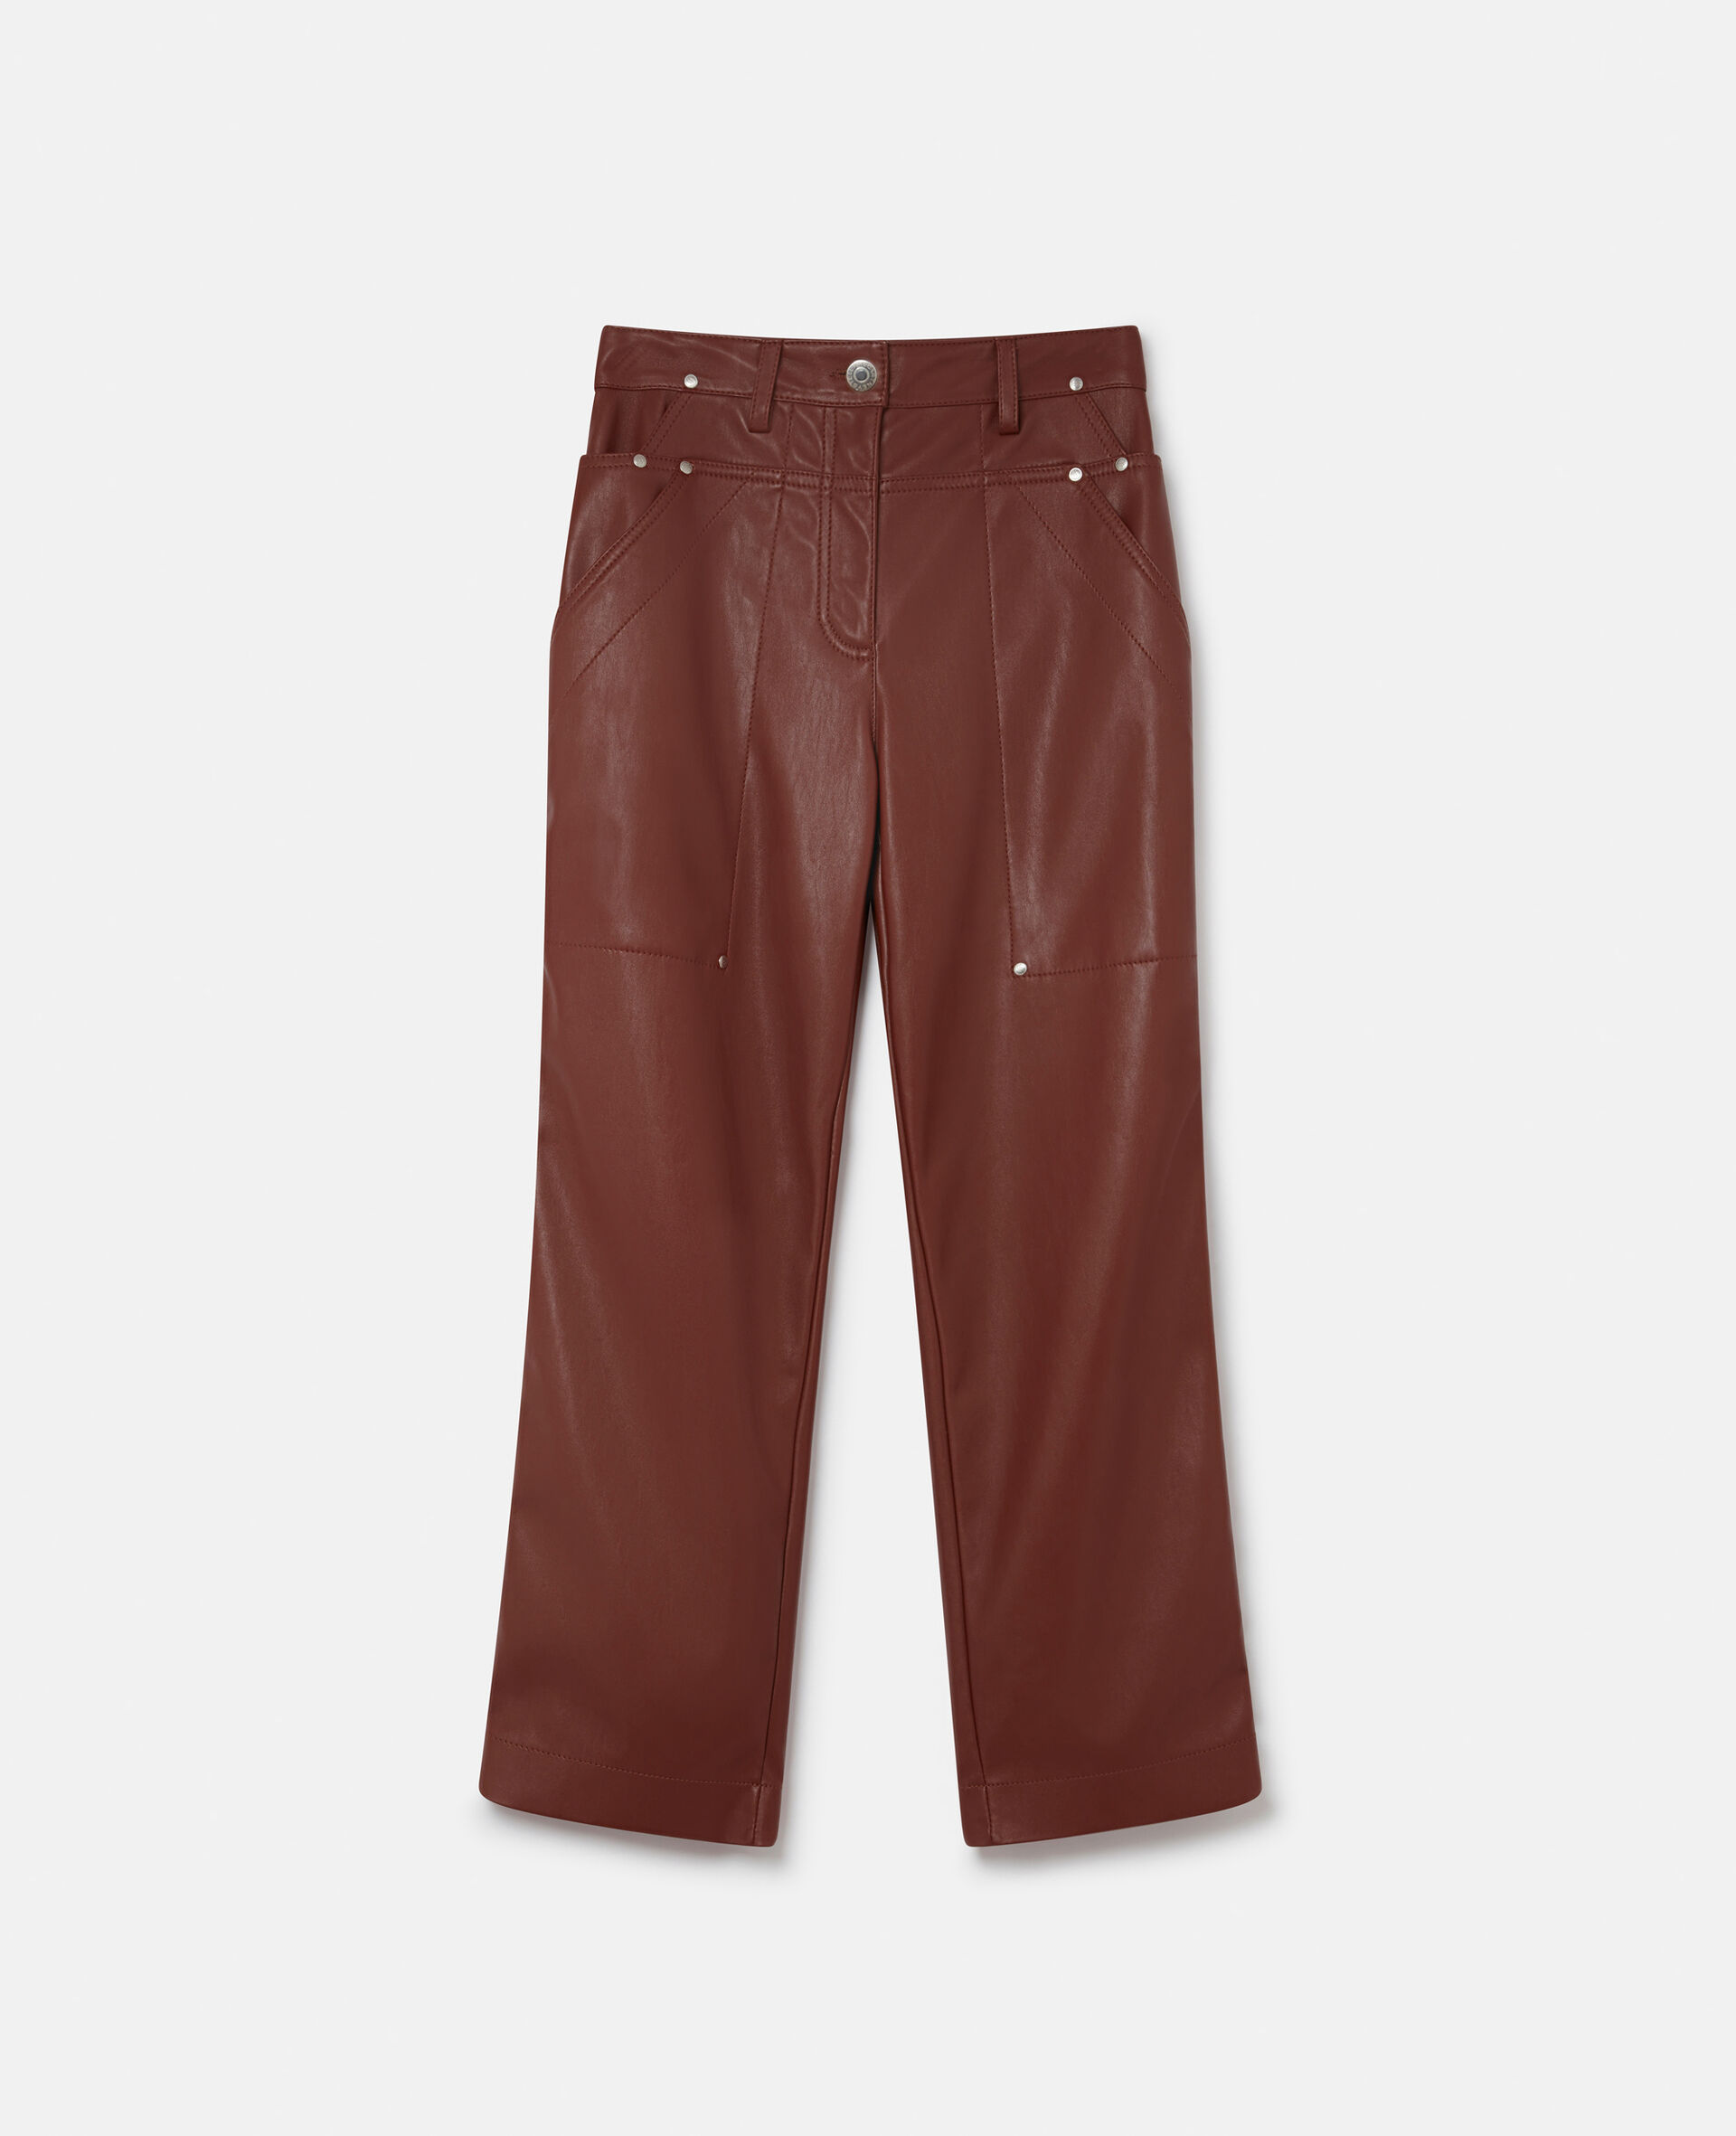 Alter Mat Kick-Flare Trousers-Brown-large image number 0